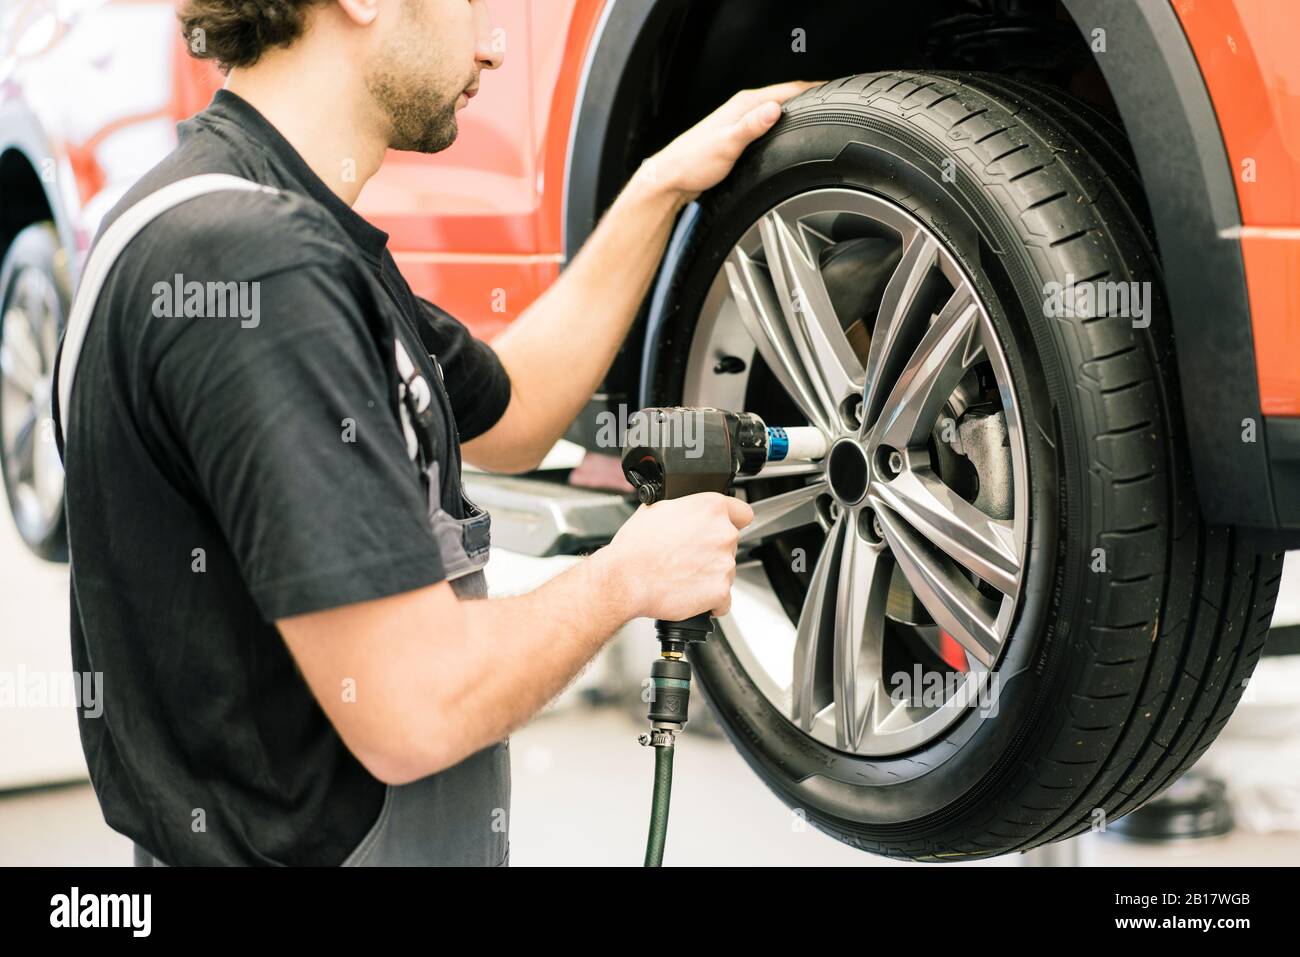 Car mechanic in a workshop changing tire Stock Photo